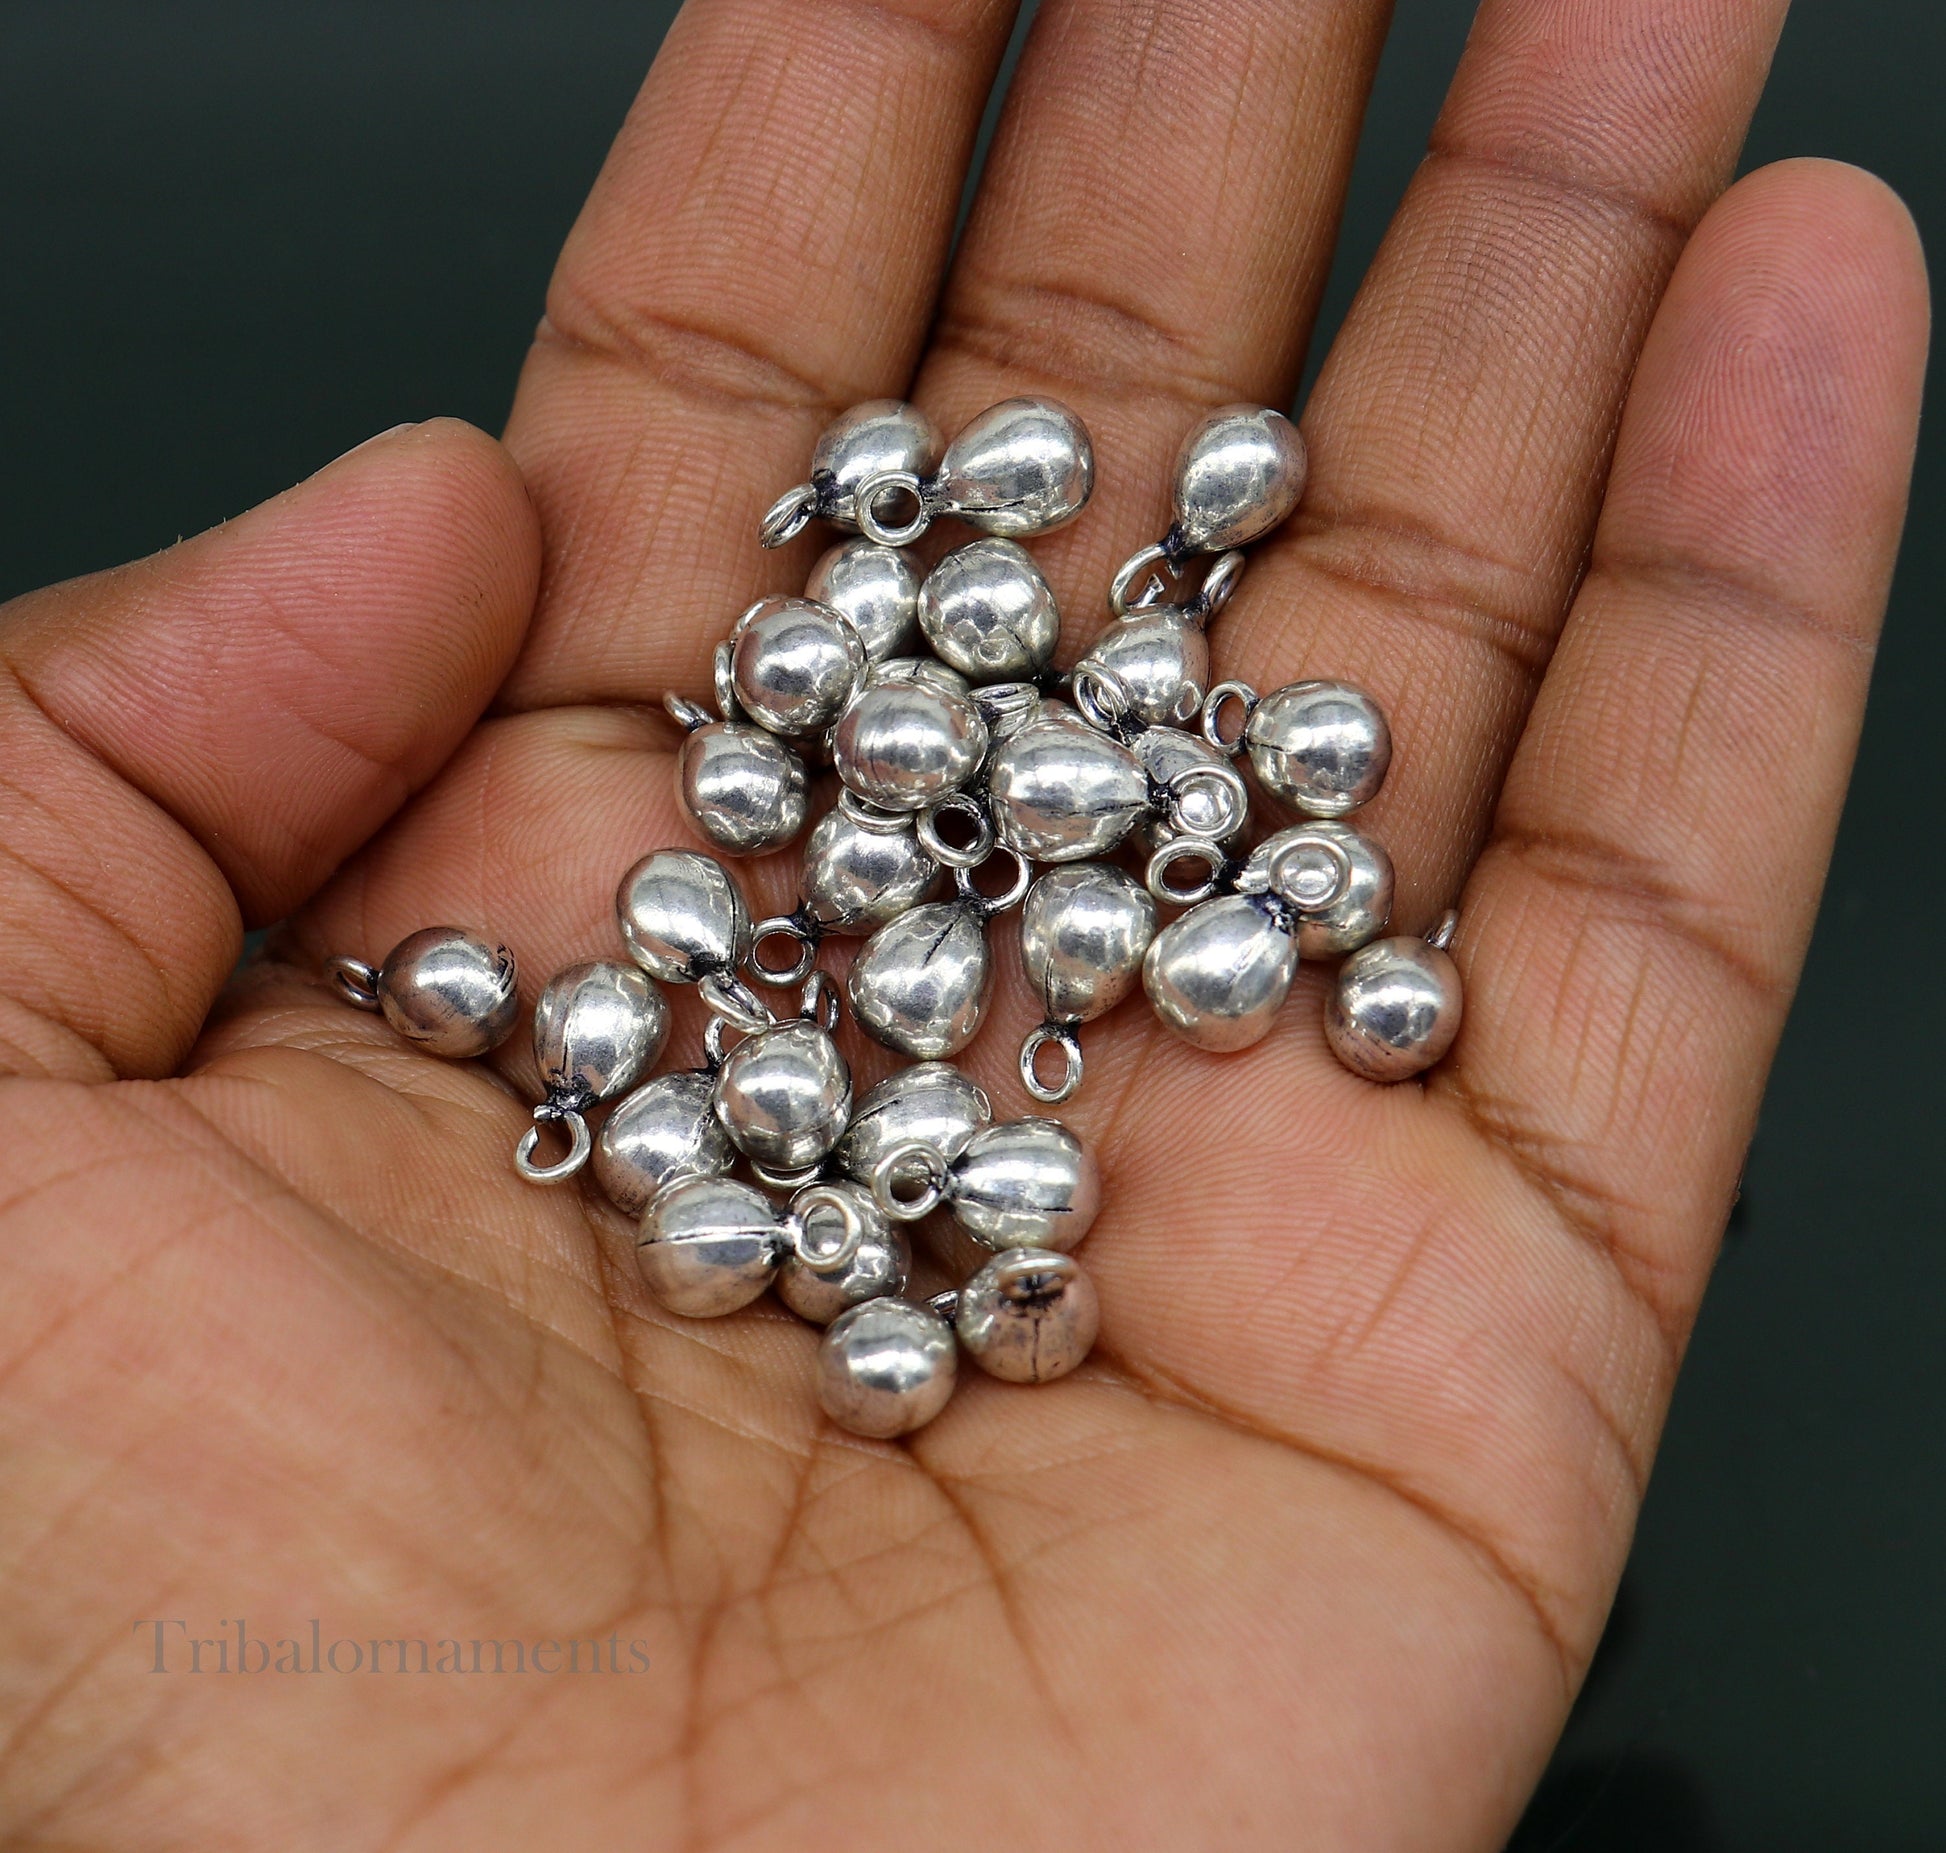 loose beads Lot 20 pieces vintage plain style handmade 925 sterling silver  beads or hanging drops for custom jewelry making ideas bd11